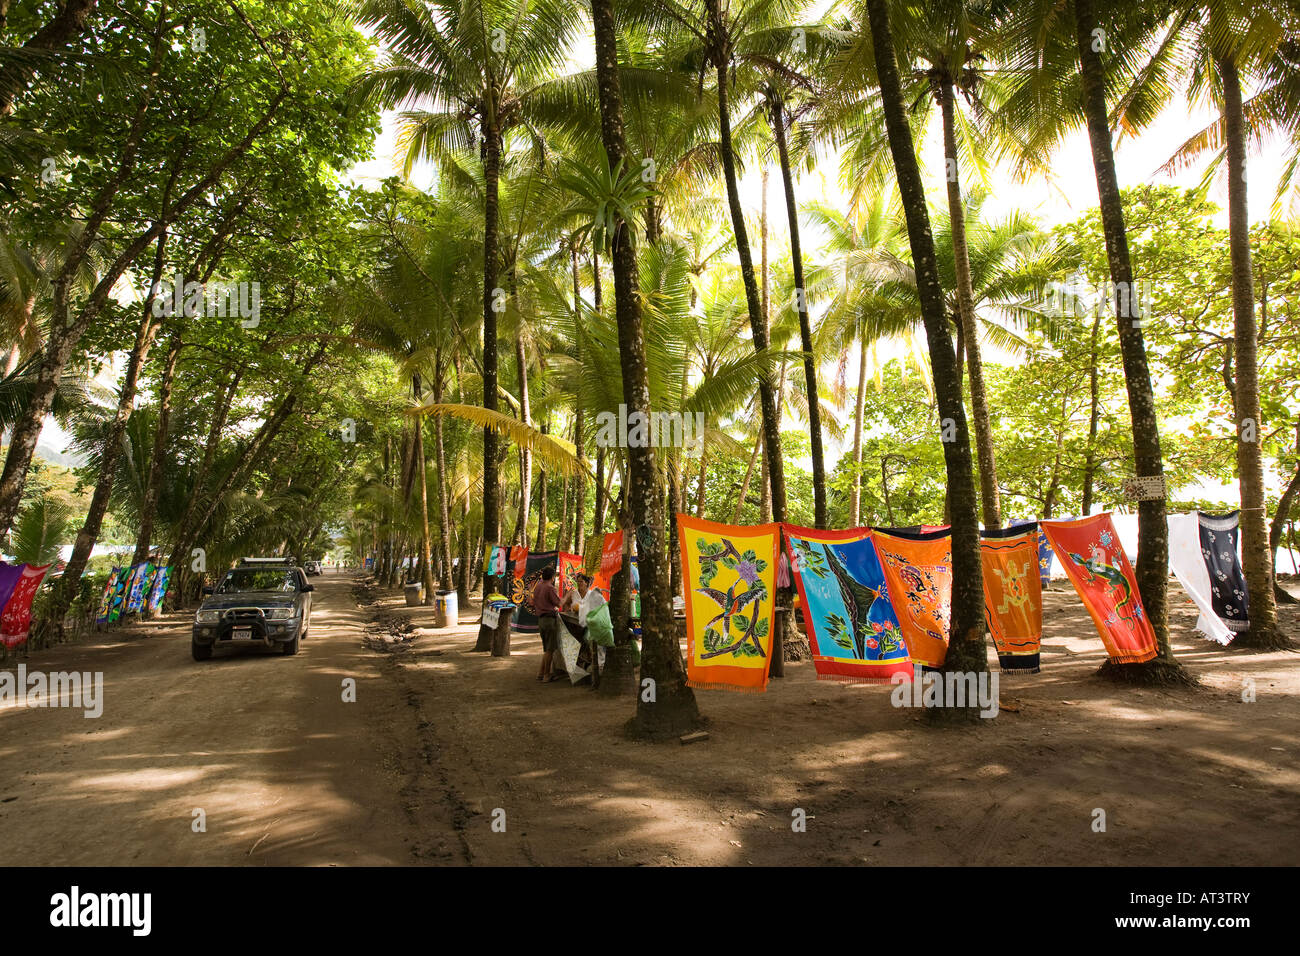 Costa Rica Dominical seafront market selling souvenirs and beach textiles Stock Photo